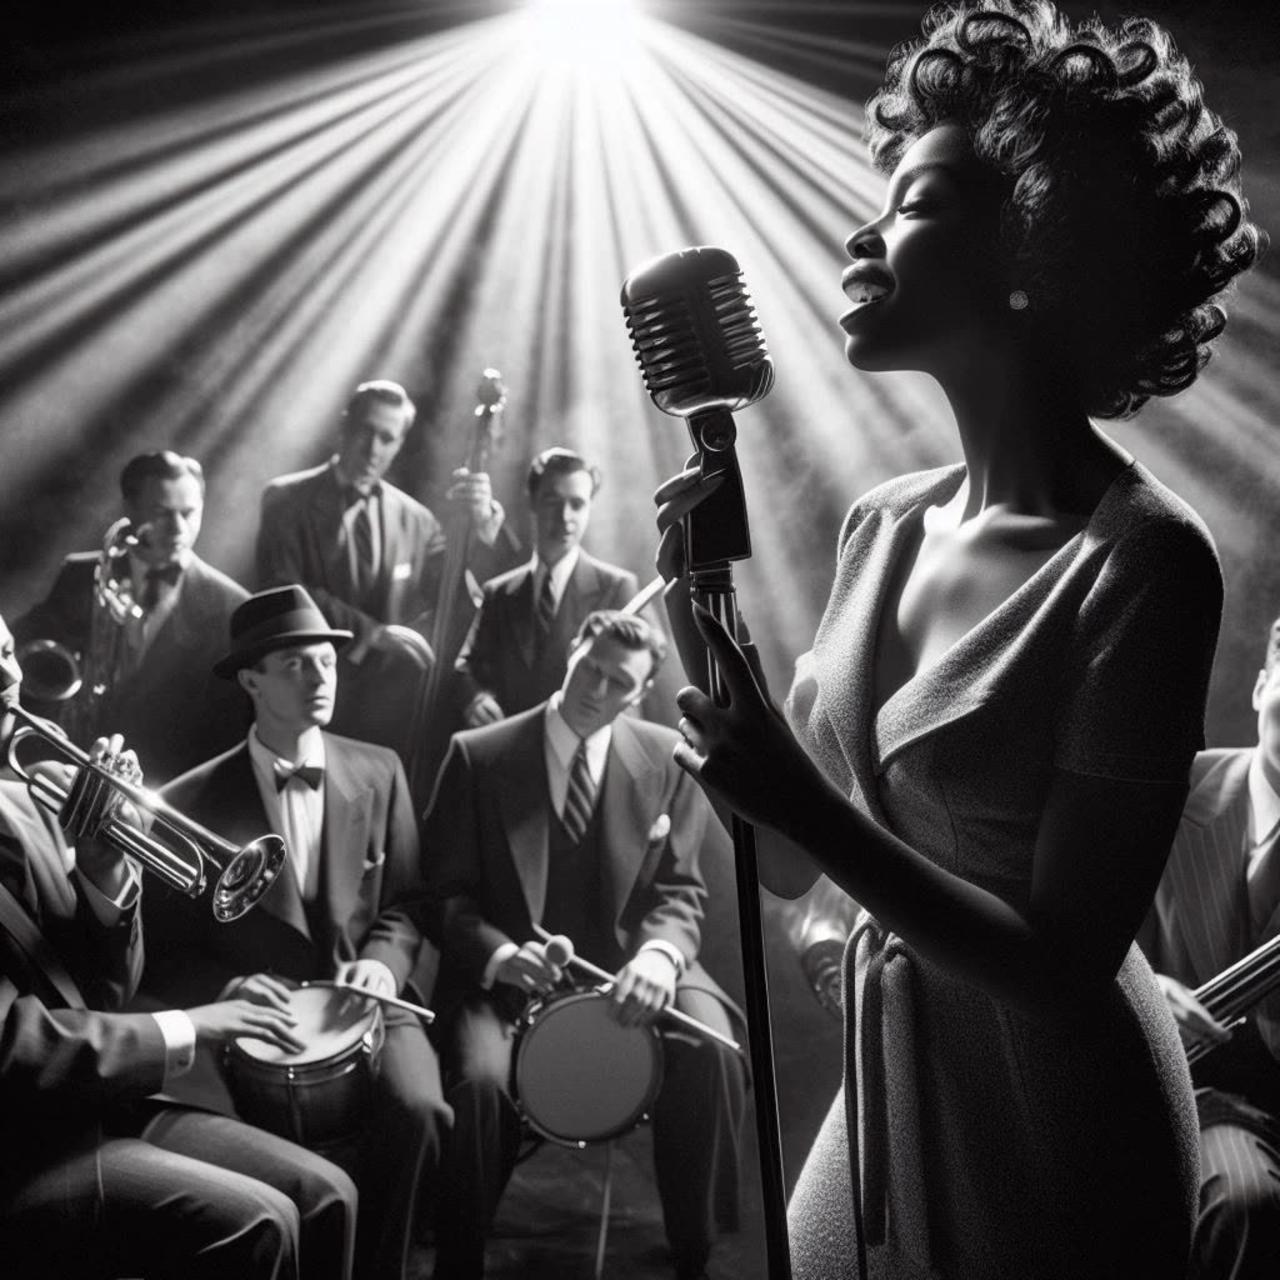 Jazz in the 1940s